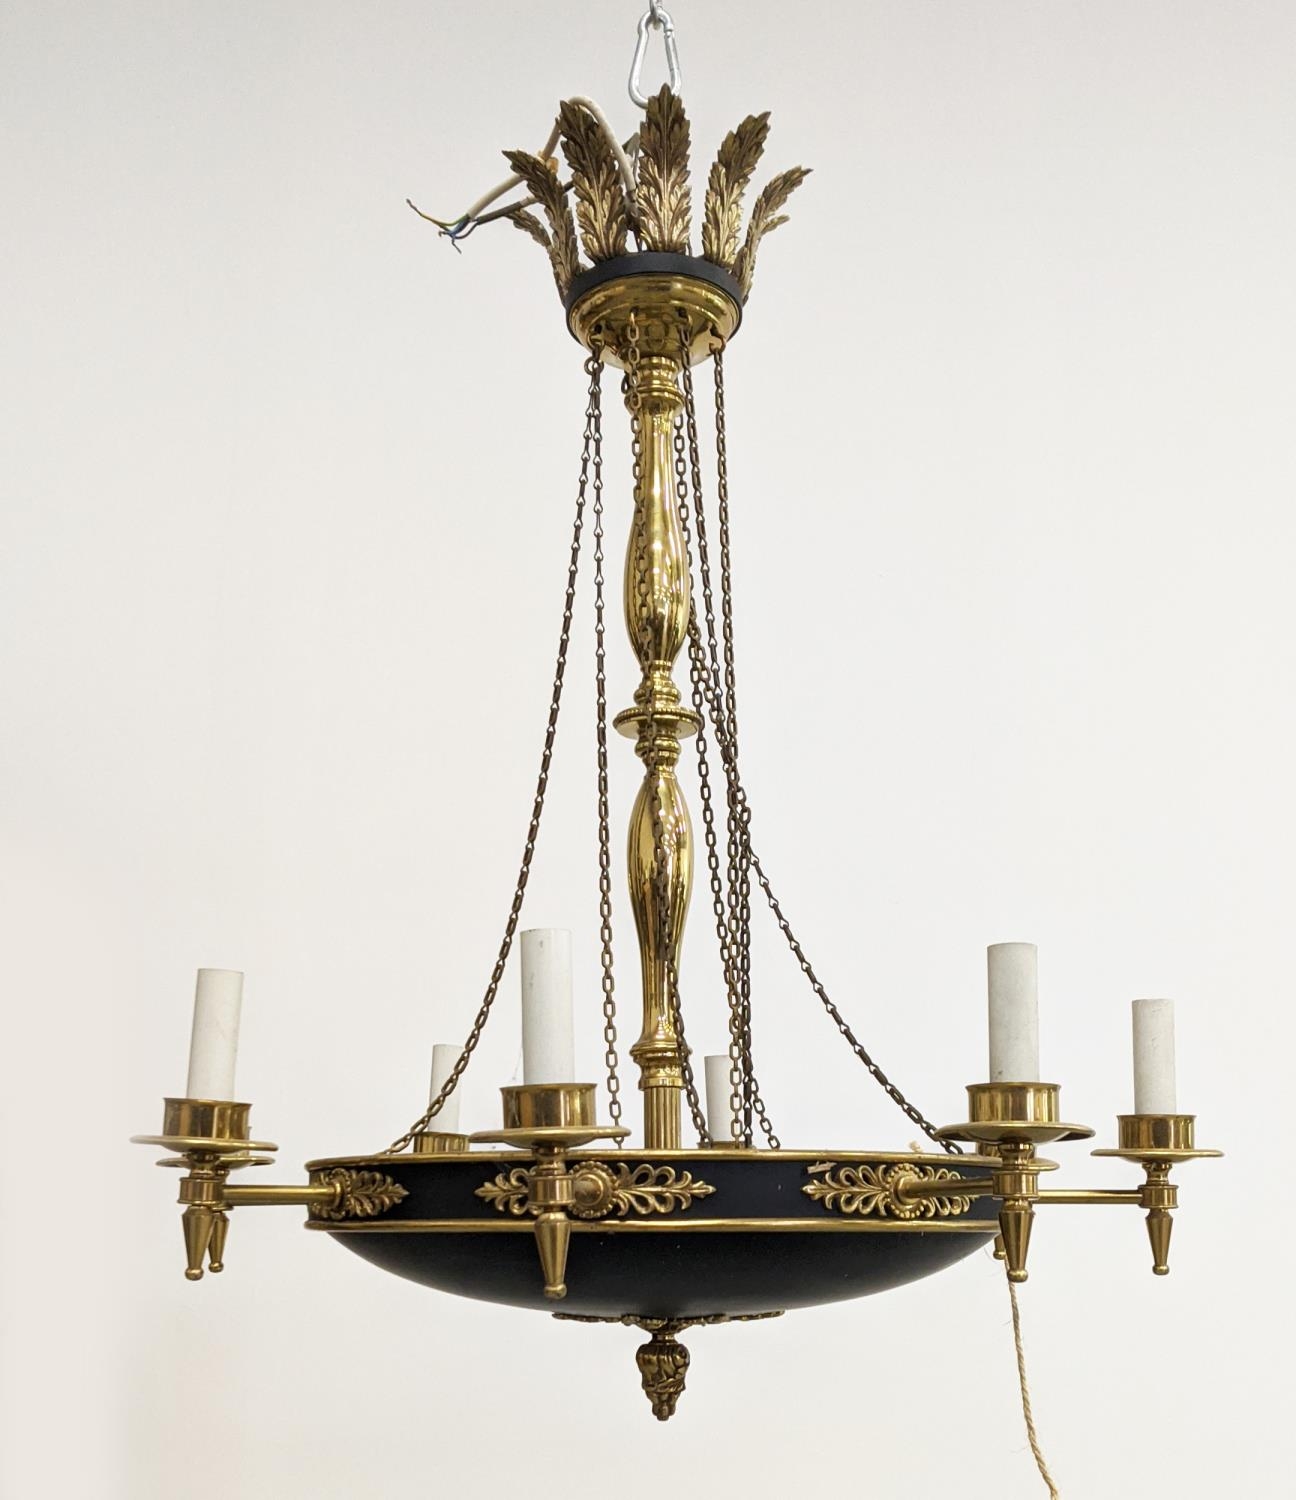 CEILING LIGHT EMPIRE STYLE, black metal and brass with acanthus leaf detail, 77cm W x 96cm H approx. - Bild 4 aus 14